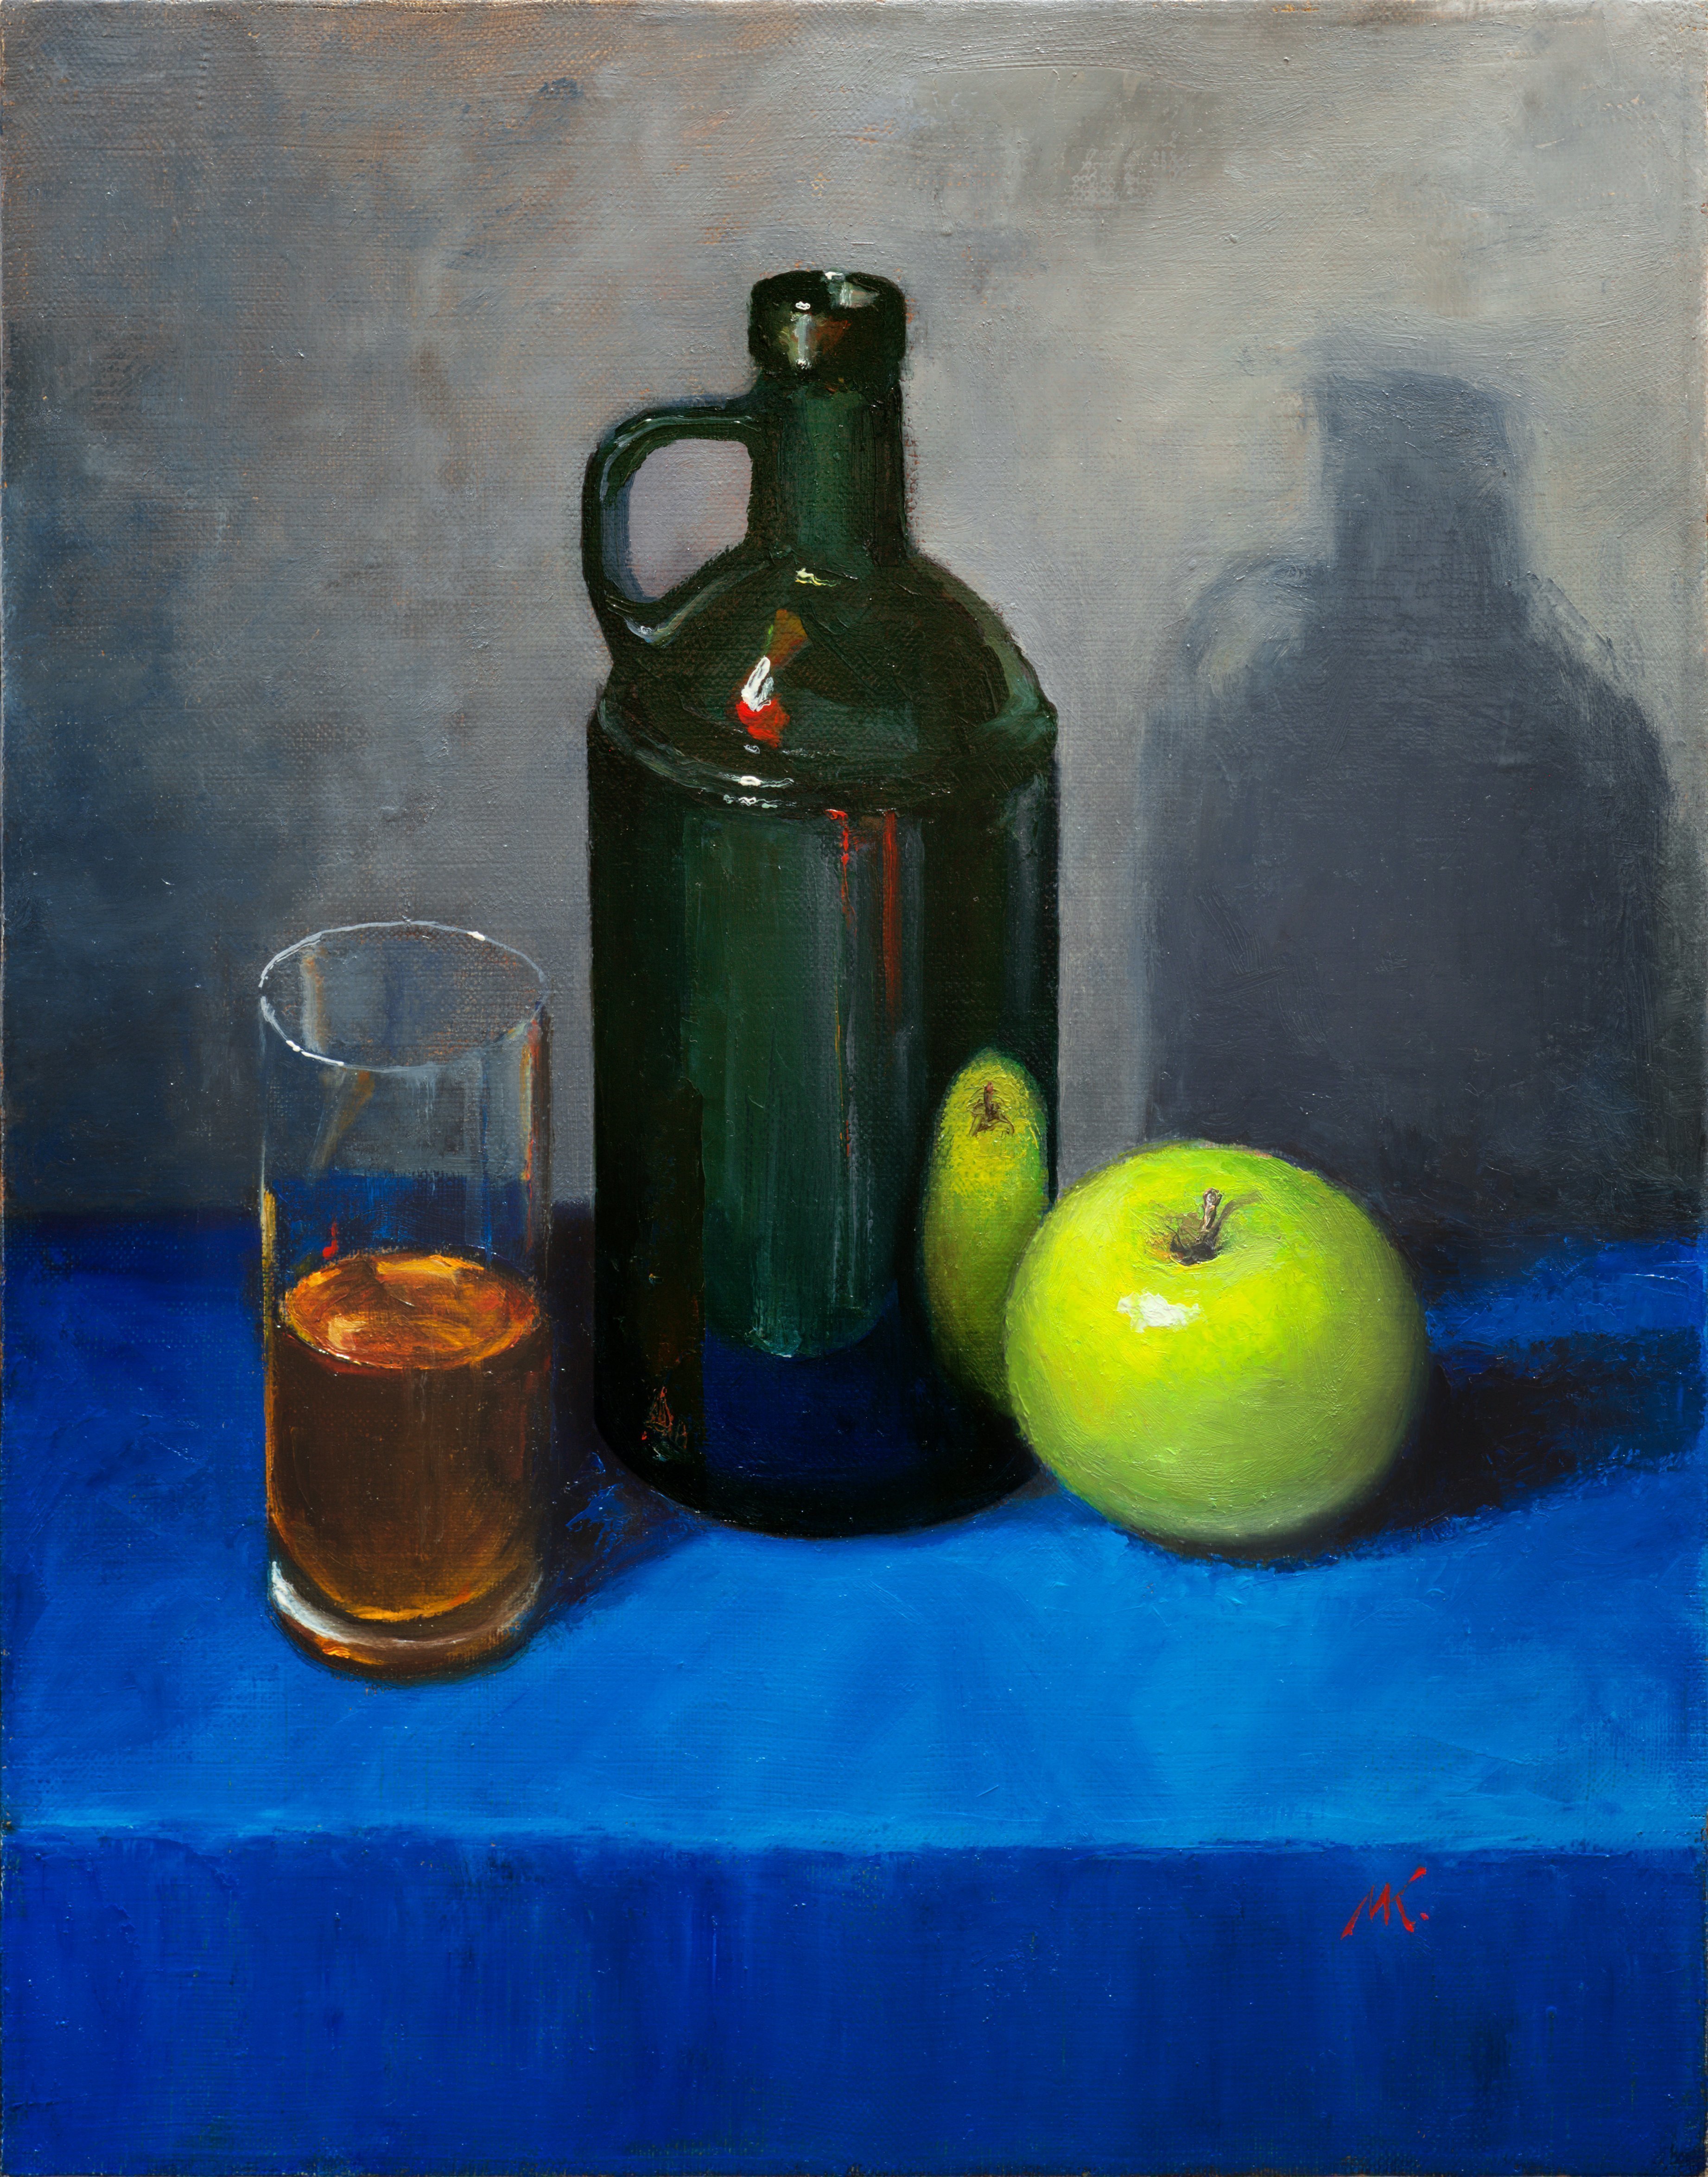 Mikhail Velavok; Blue Table, 2017, Original Painting Oil, 13.8 x 17.7 inches. Artwork description: 241 Original oil painting on canvas. The work is being sold unframed. The frame in the additional photo is an example only.apple, green apple, shadow, glass, bottle, bottle glass, green glass, dark, blue...